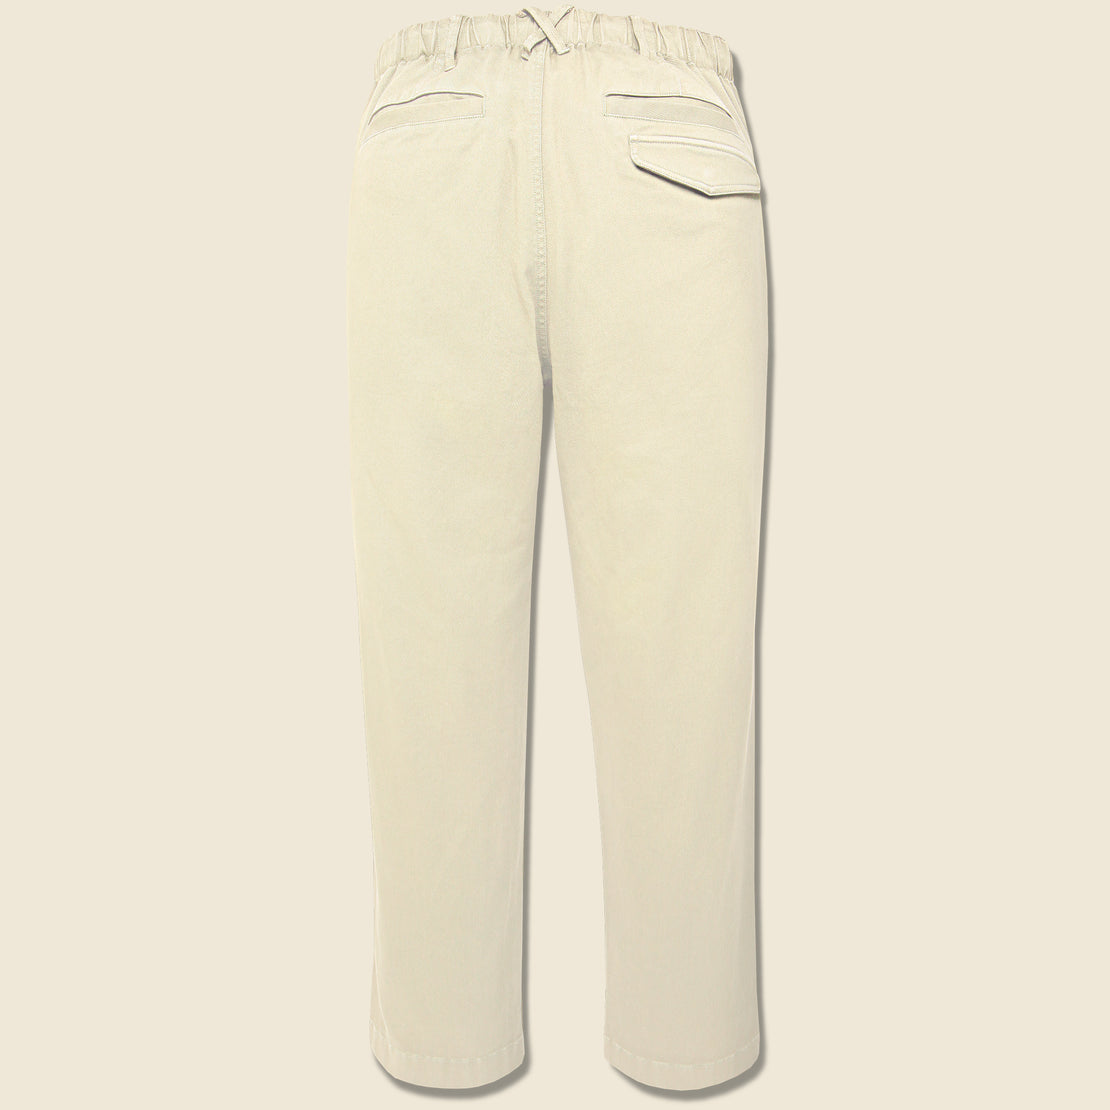 Pull On Button Fly Pants - Oat Milk - Alex Mill - STAG Provisions - Pants - Twill